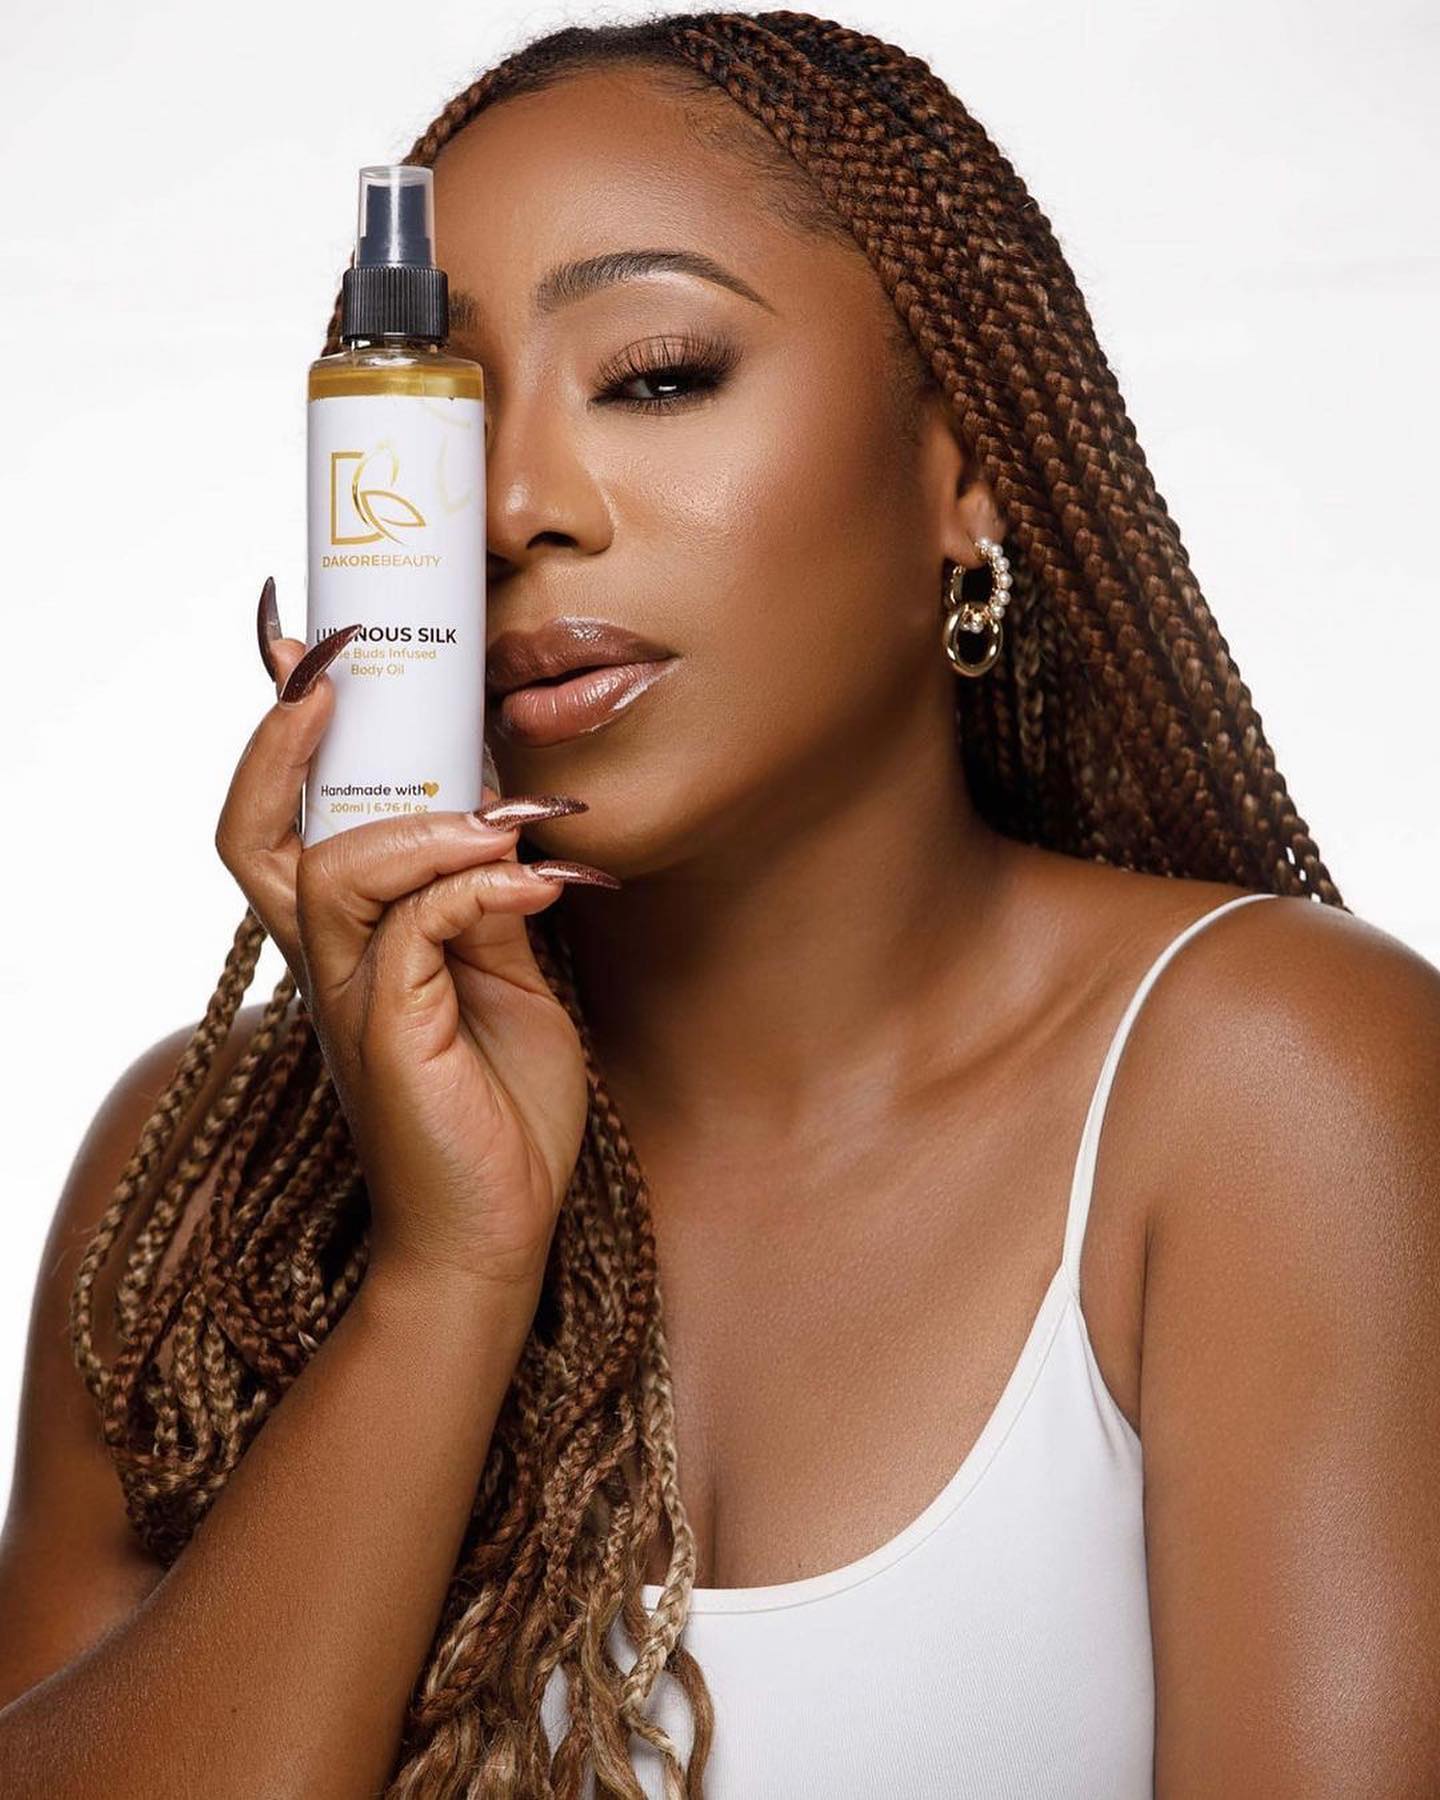 Dakore Egbuson-Akande launches her All-Natural Beauty Line for Women of Colour in Lagos